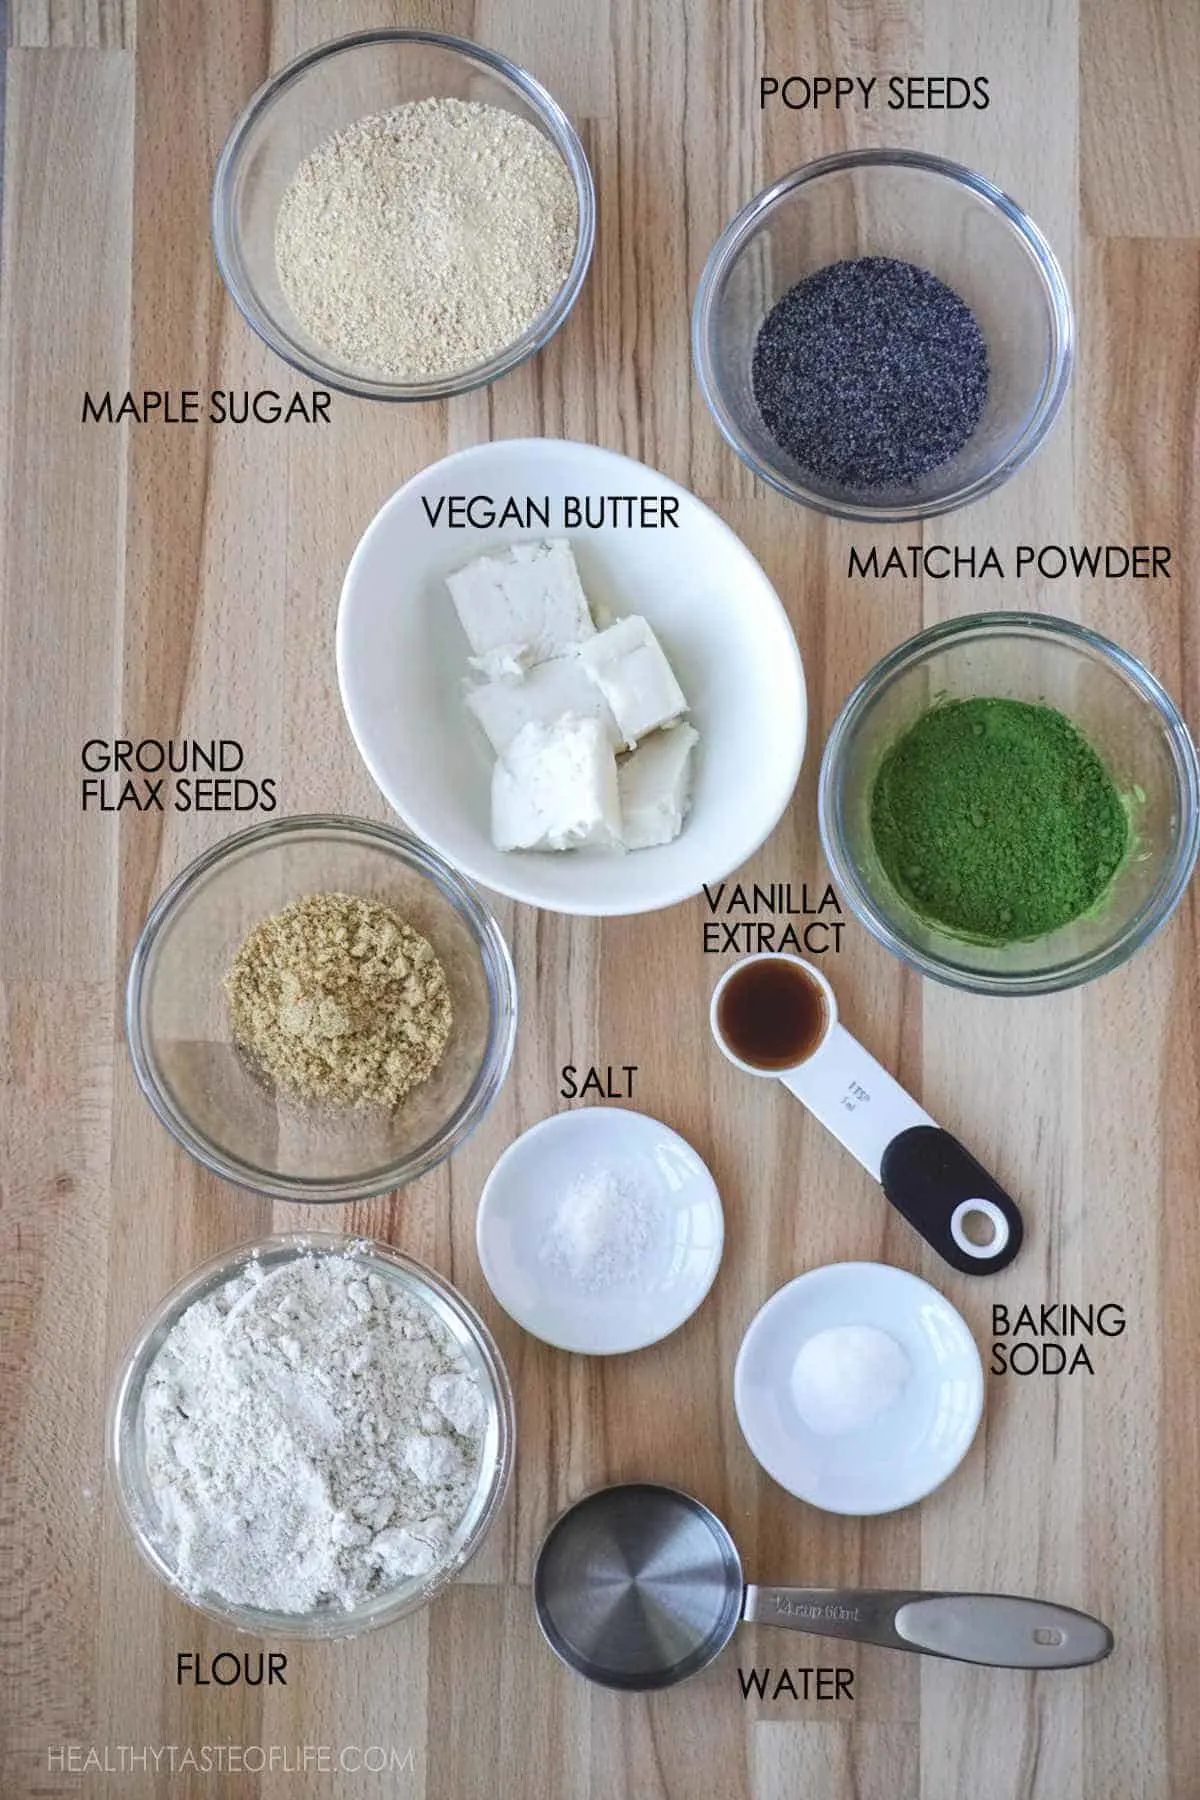 Ingredients for matcha cookies. How to make matcha cookies with matcha powder and vegan ingredients